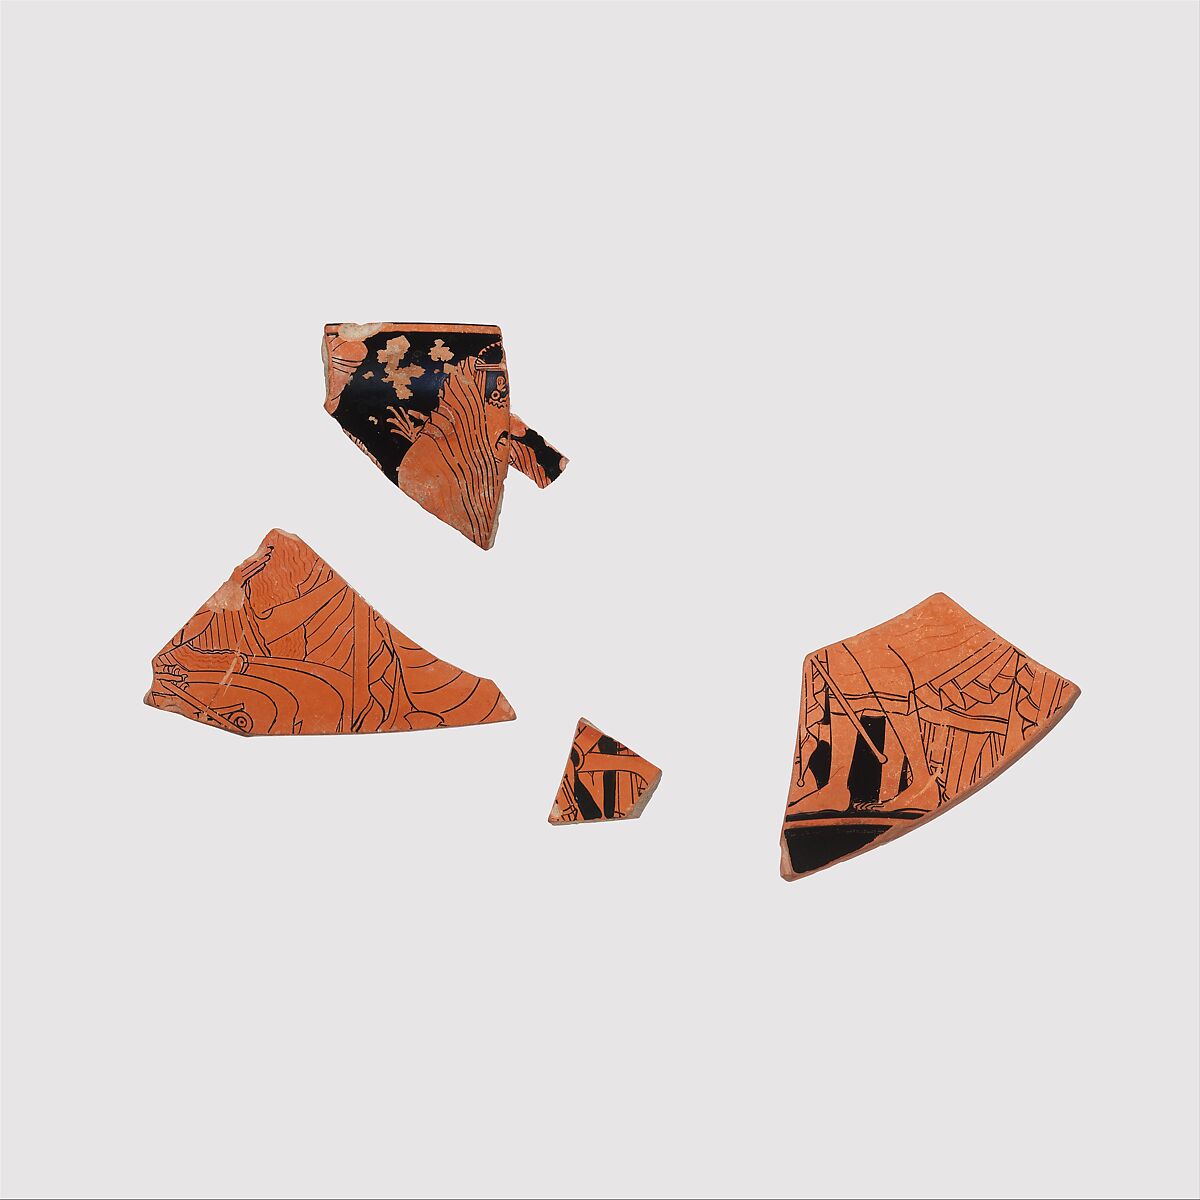 Fragments of a terracotta kylix (drinking cup), Attributed to Euthymides, Terracotta, Greek, Attic 